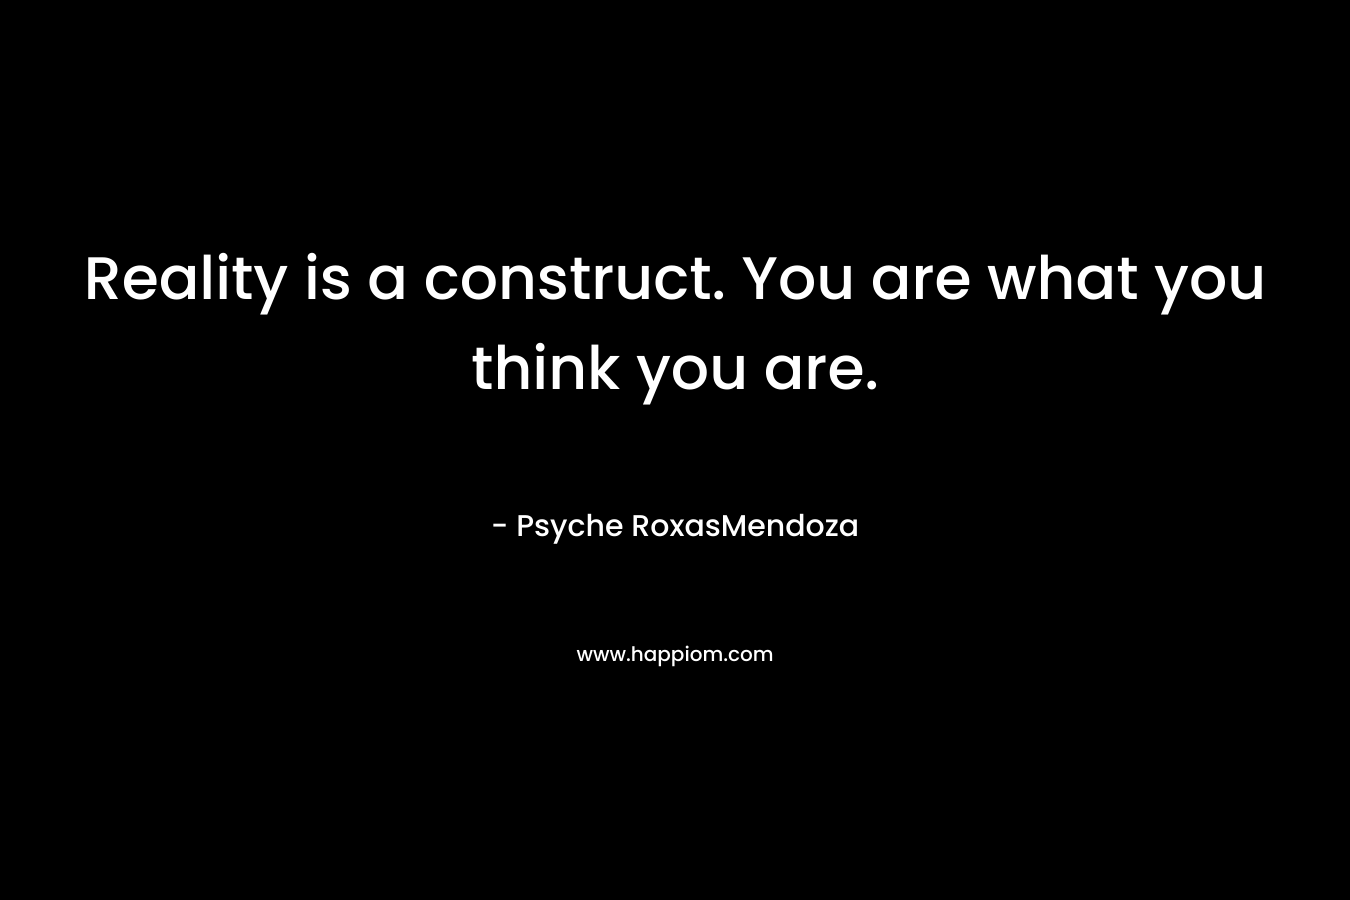 Reality is a construct. You are what you think you are.